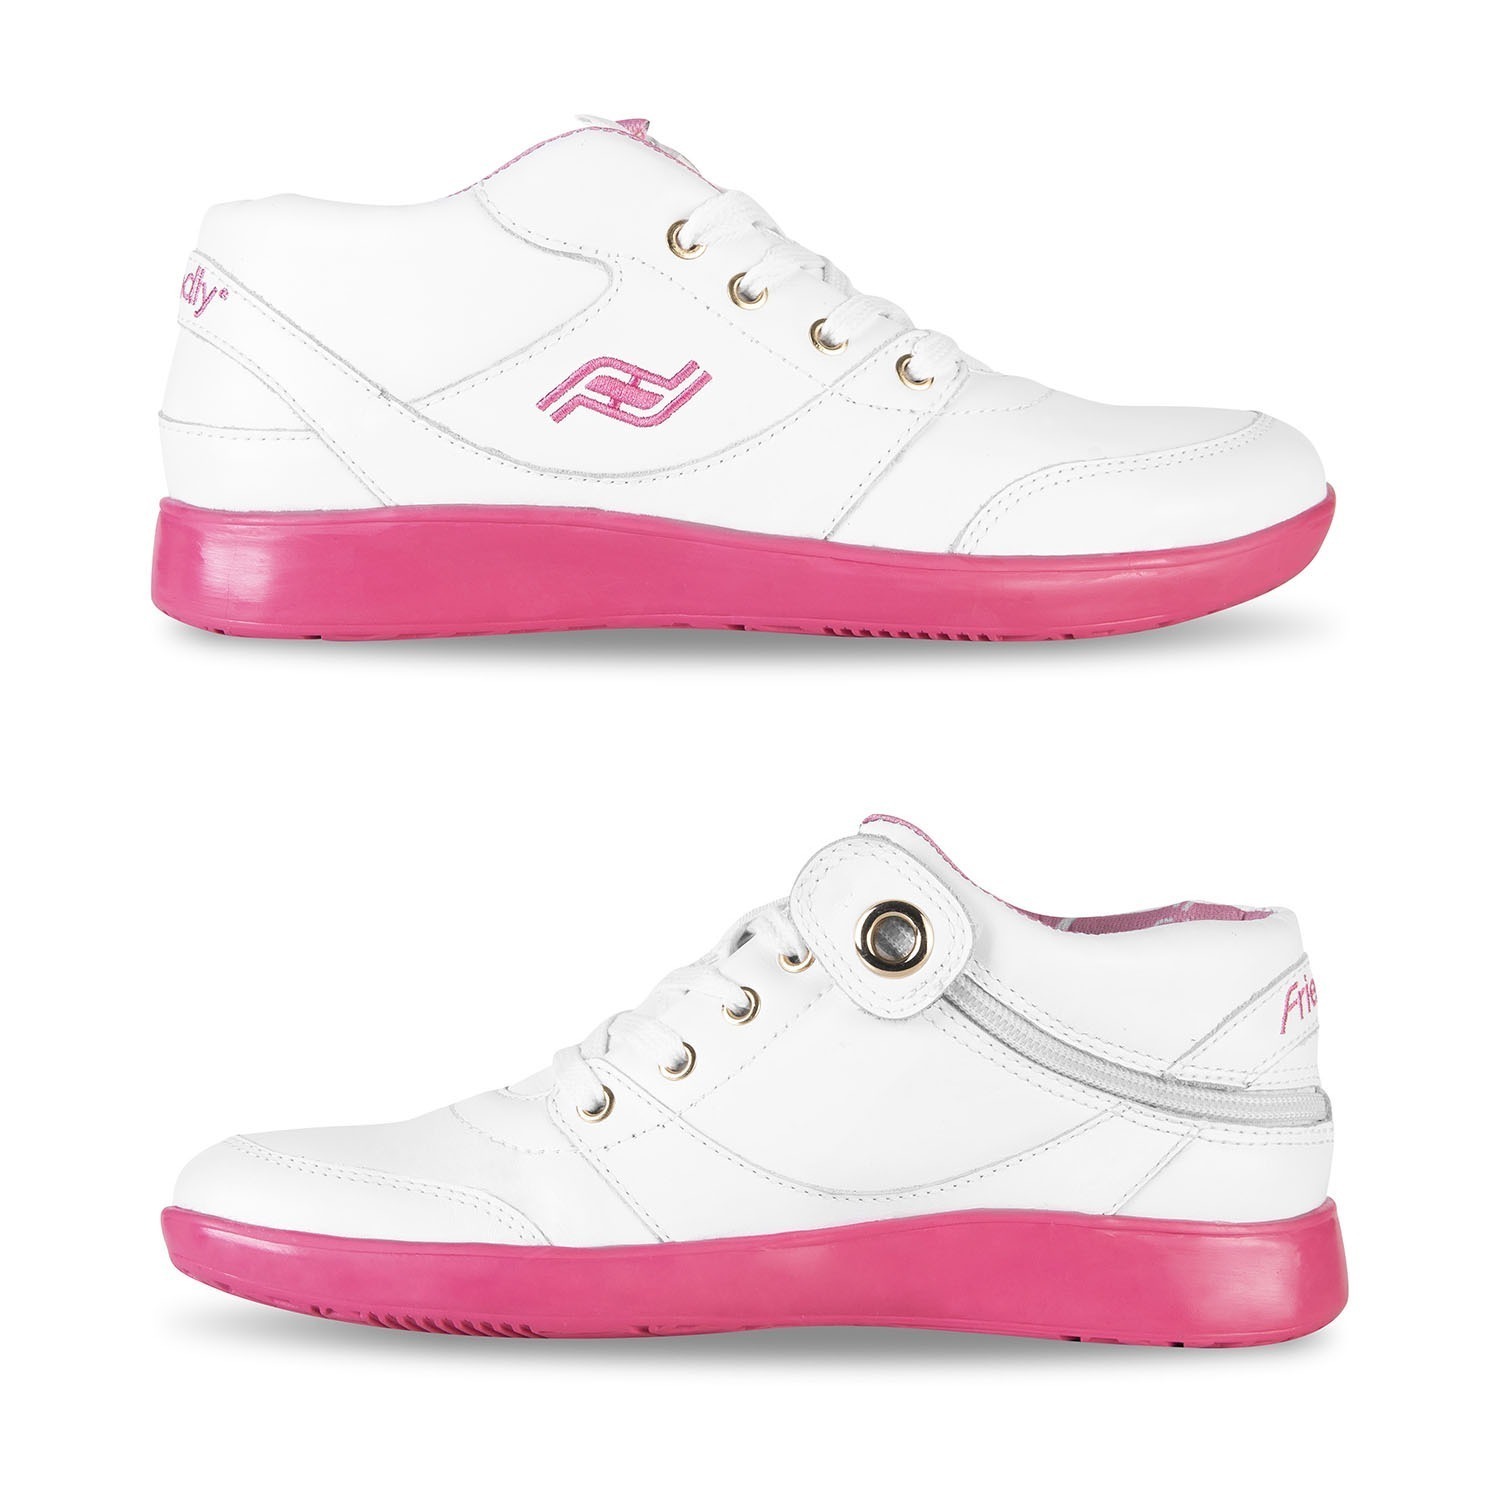 Buy > leather pink shoes > in stock